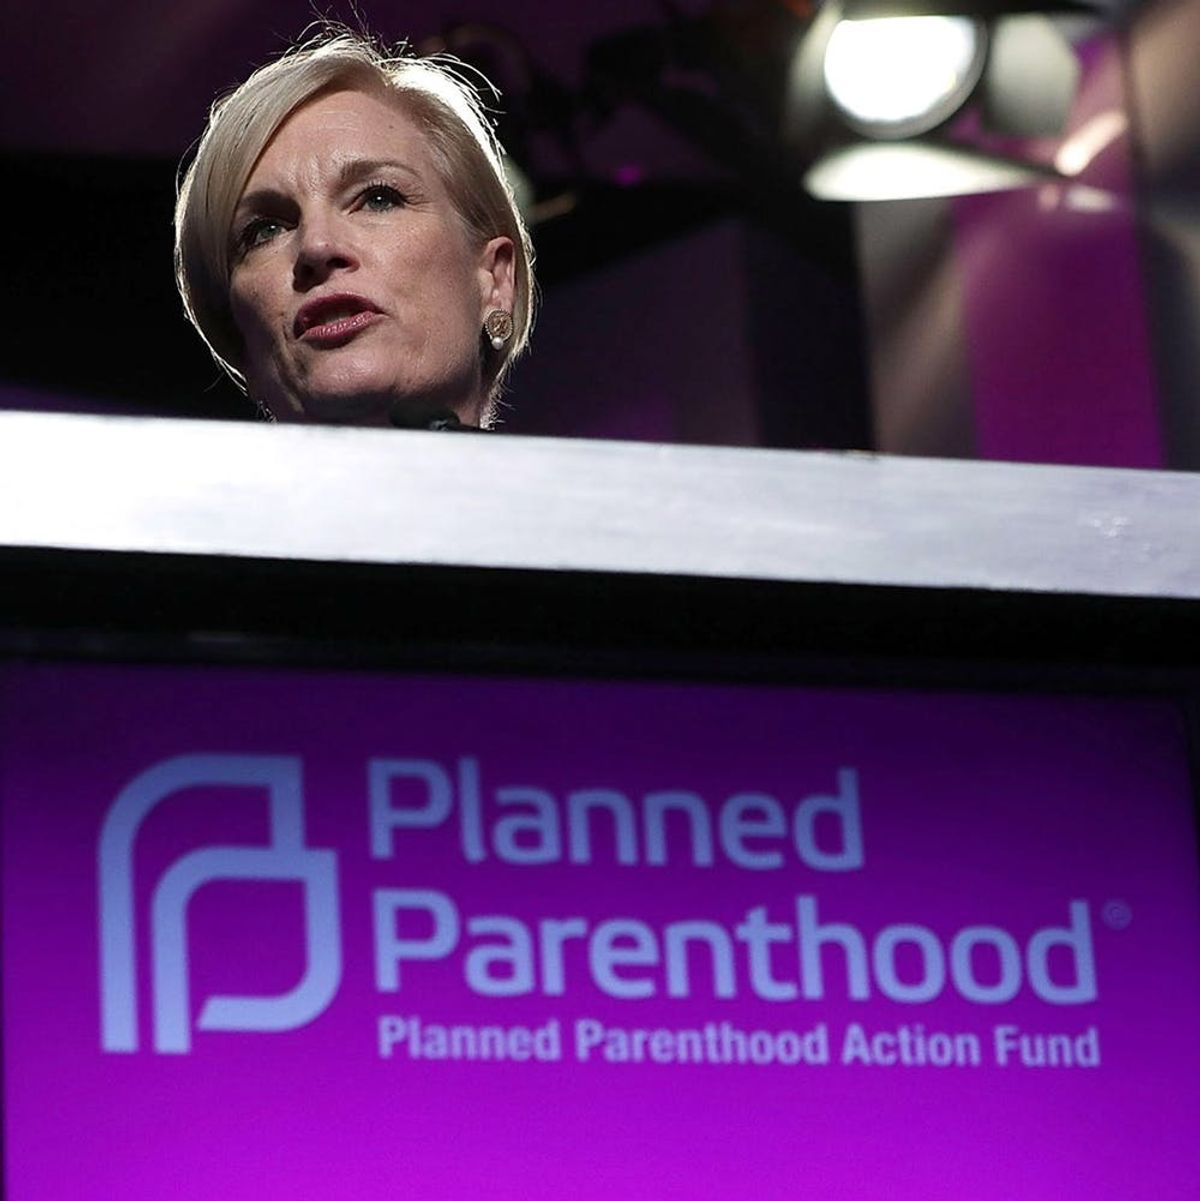 Trumpcare Failed, But Is Planned Parenthood’s Future Still Up in the Air?